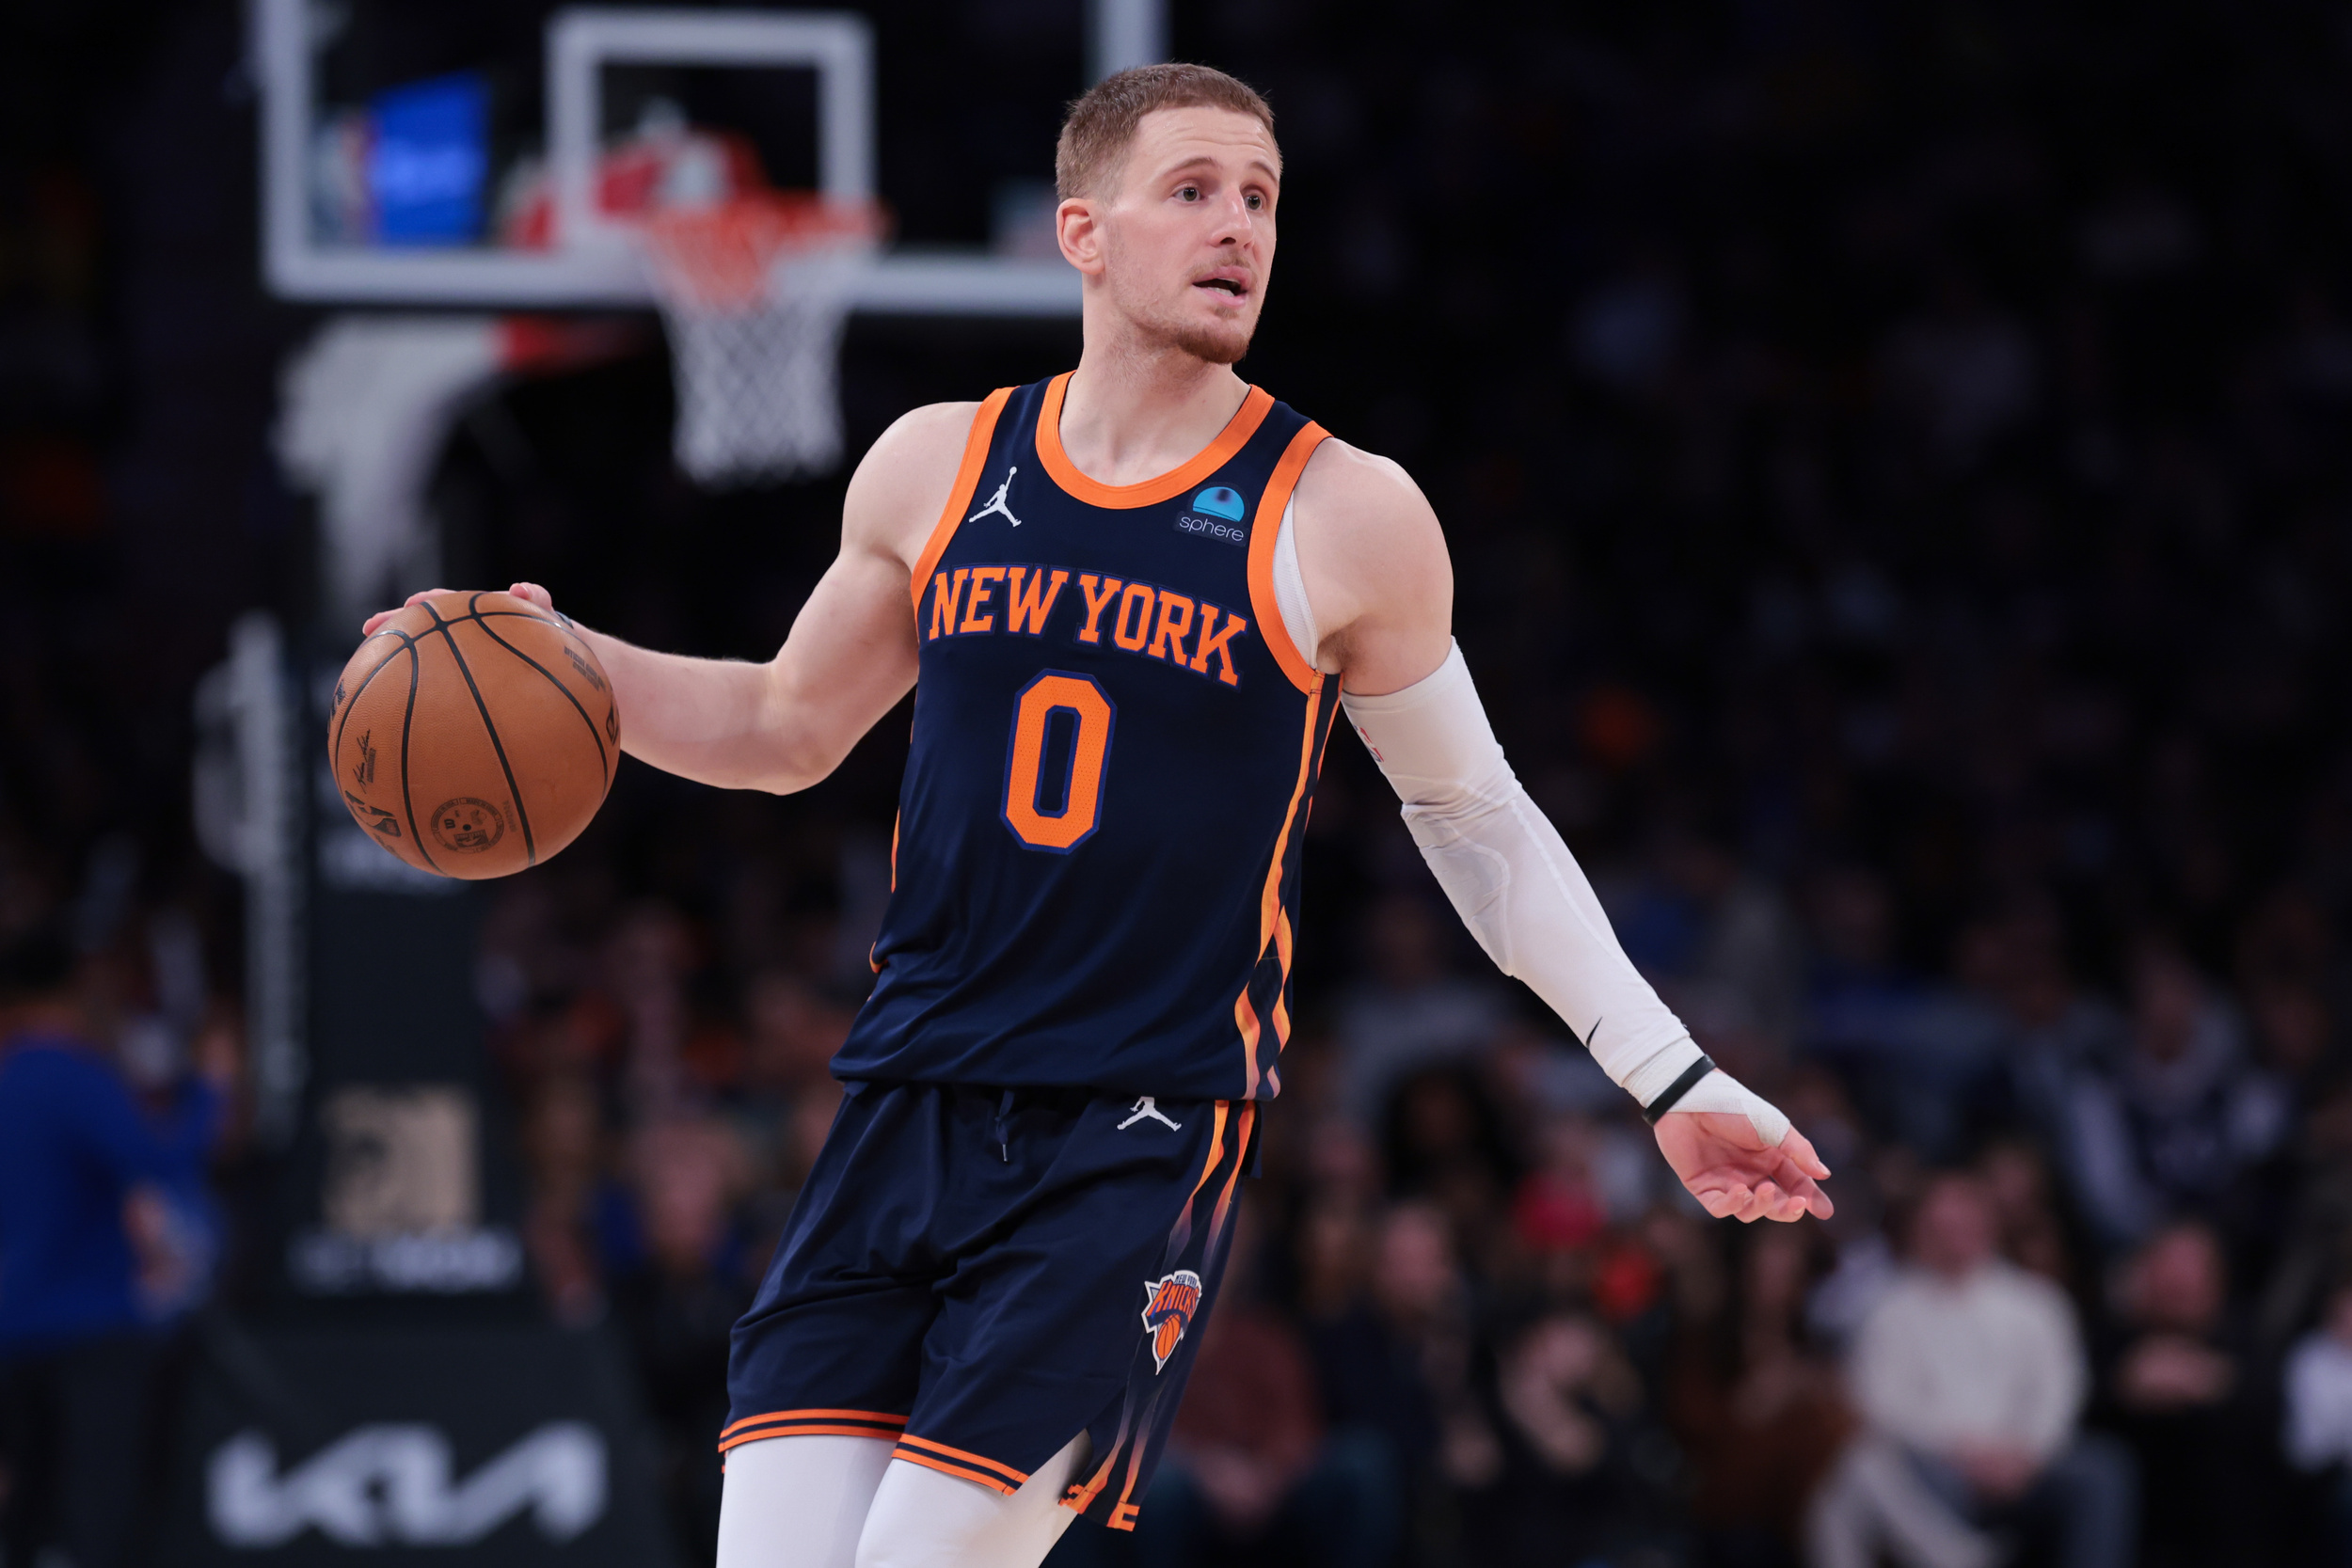 nba media irked by rule that makes knicks star ineligible for major award